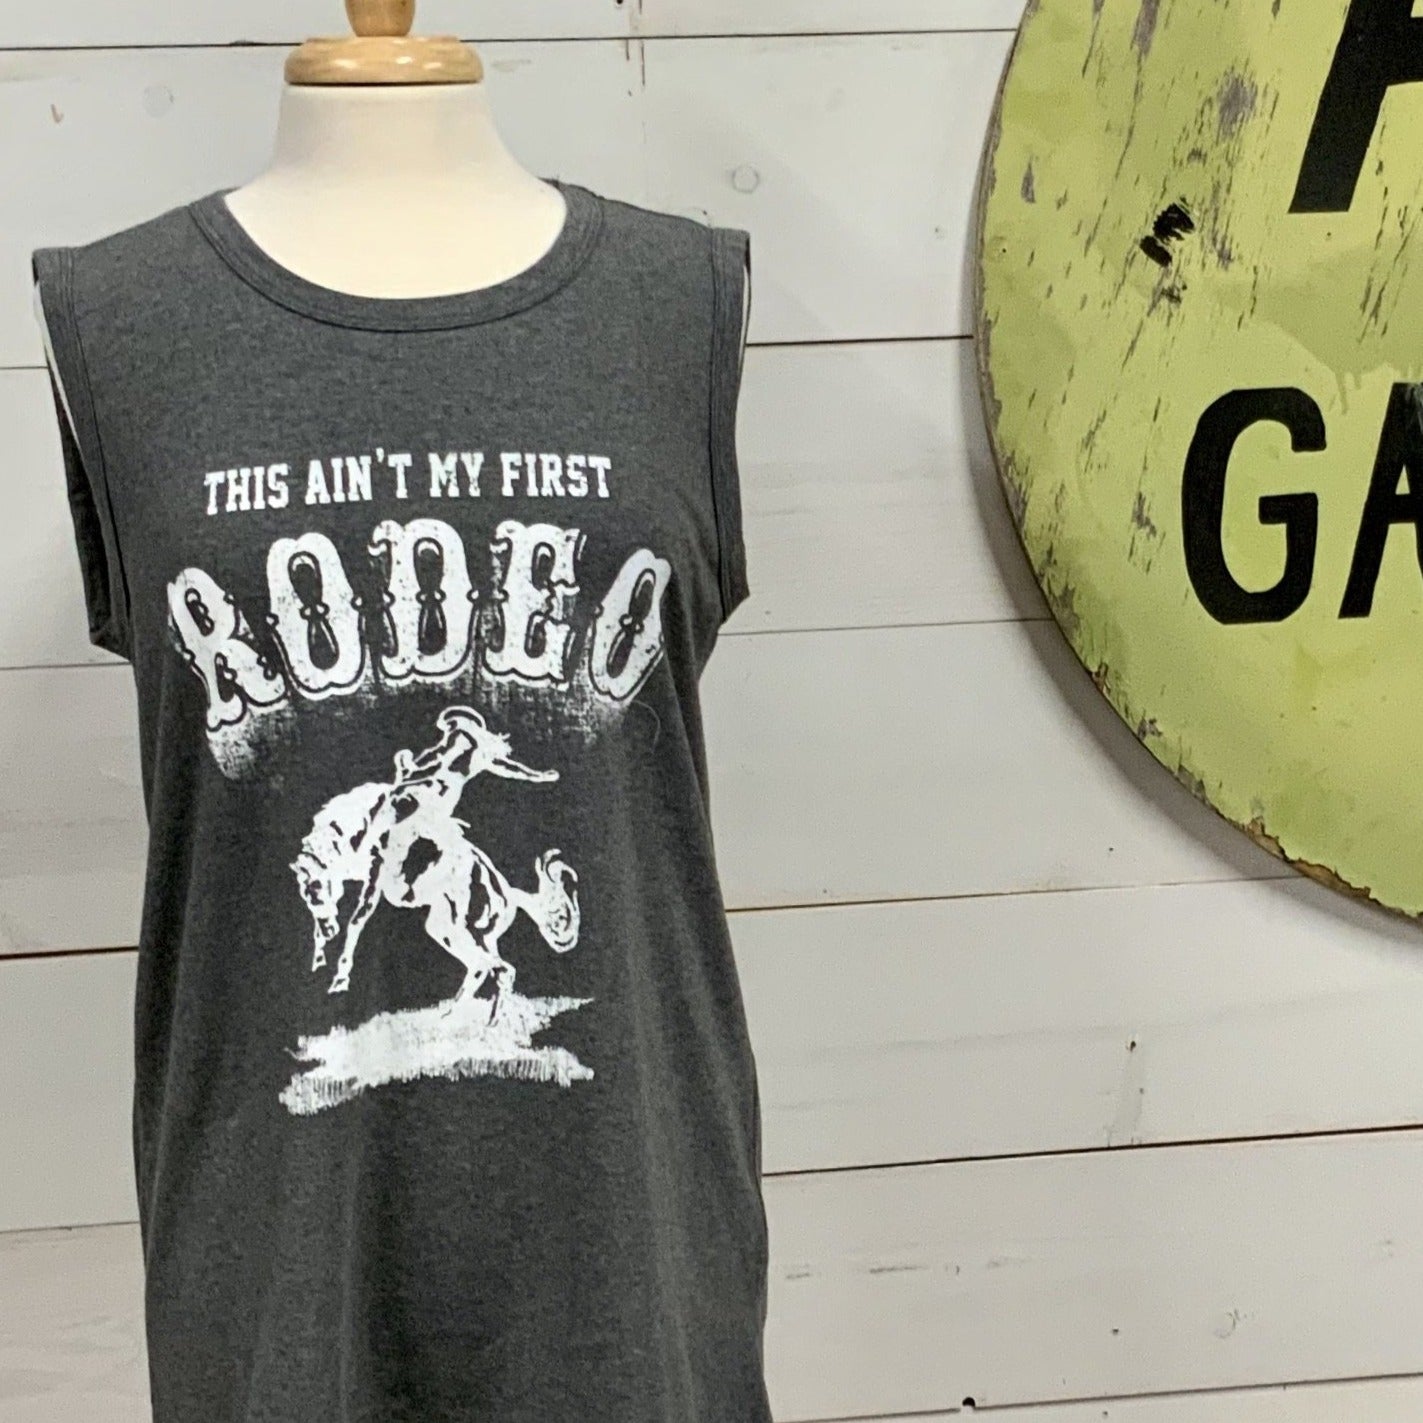 Aint My First Rodeo! Tee - The Desert Paintbrush